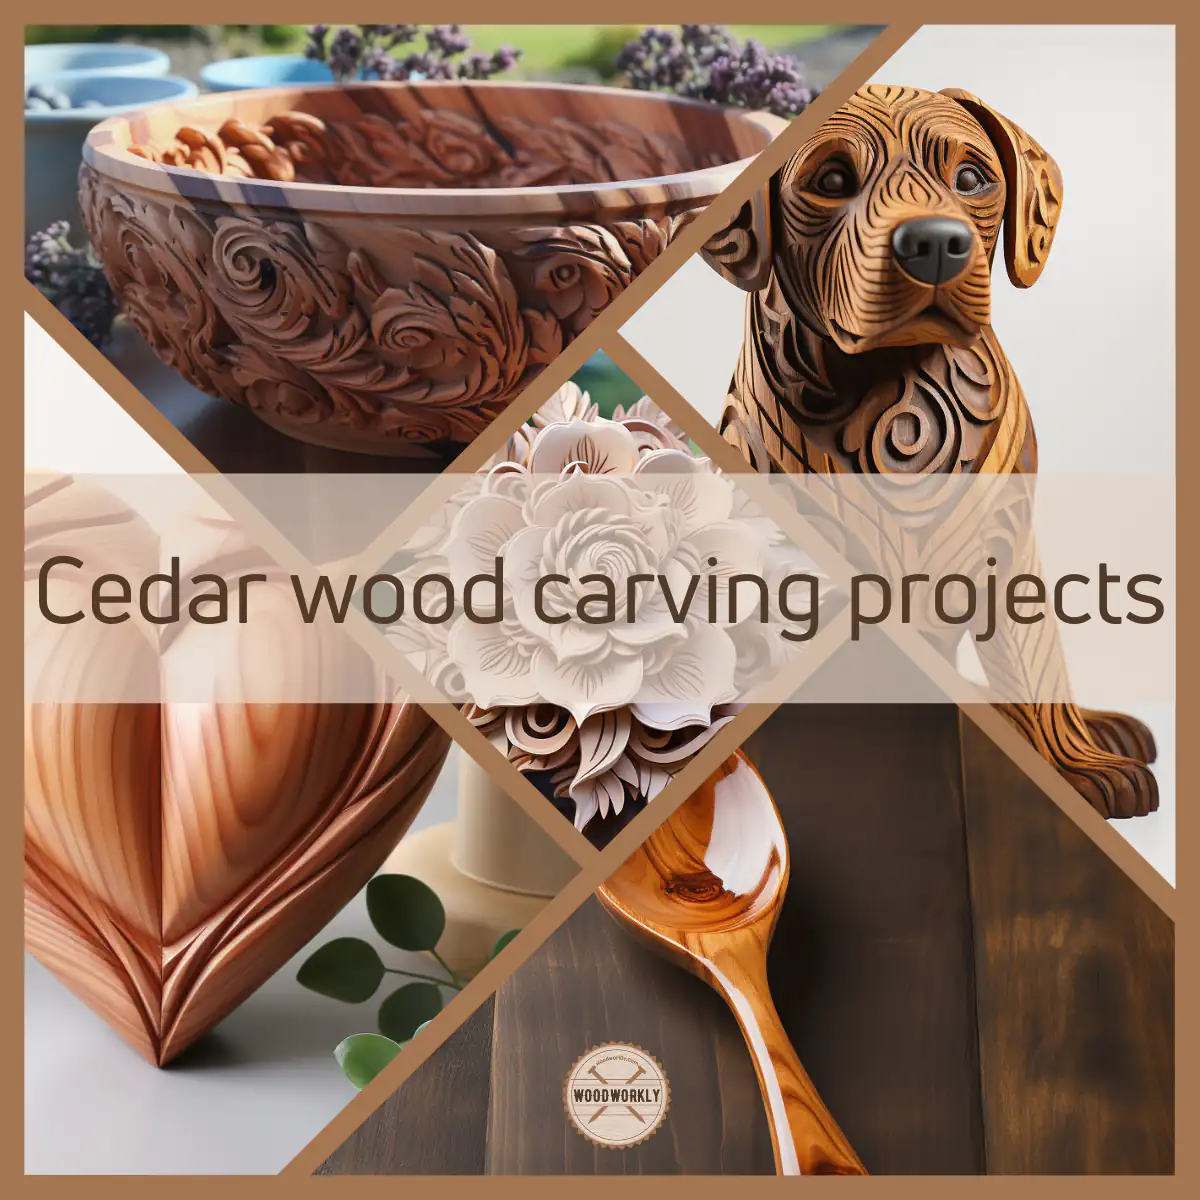 Cedar wood carved projects